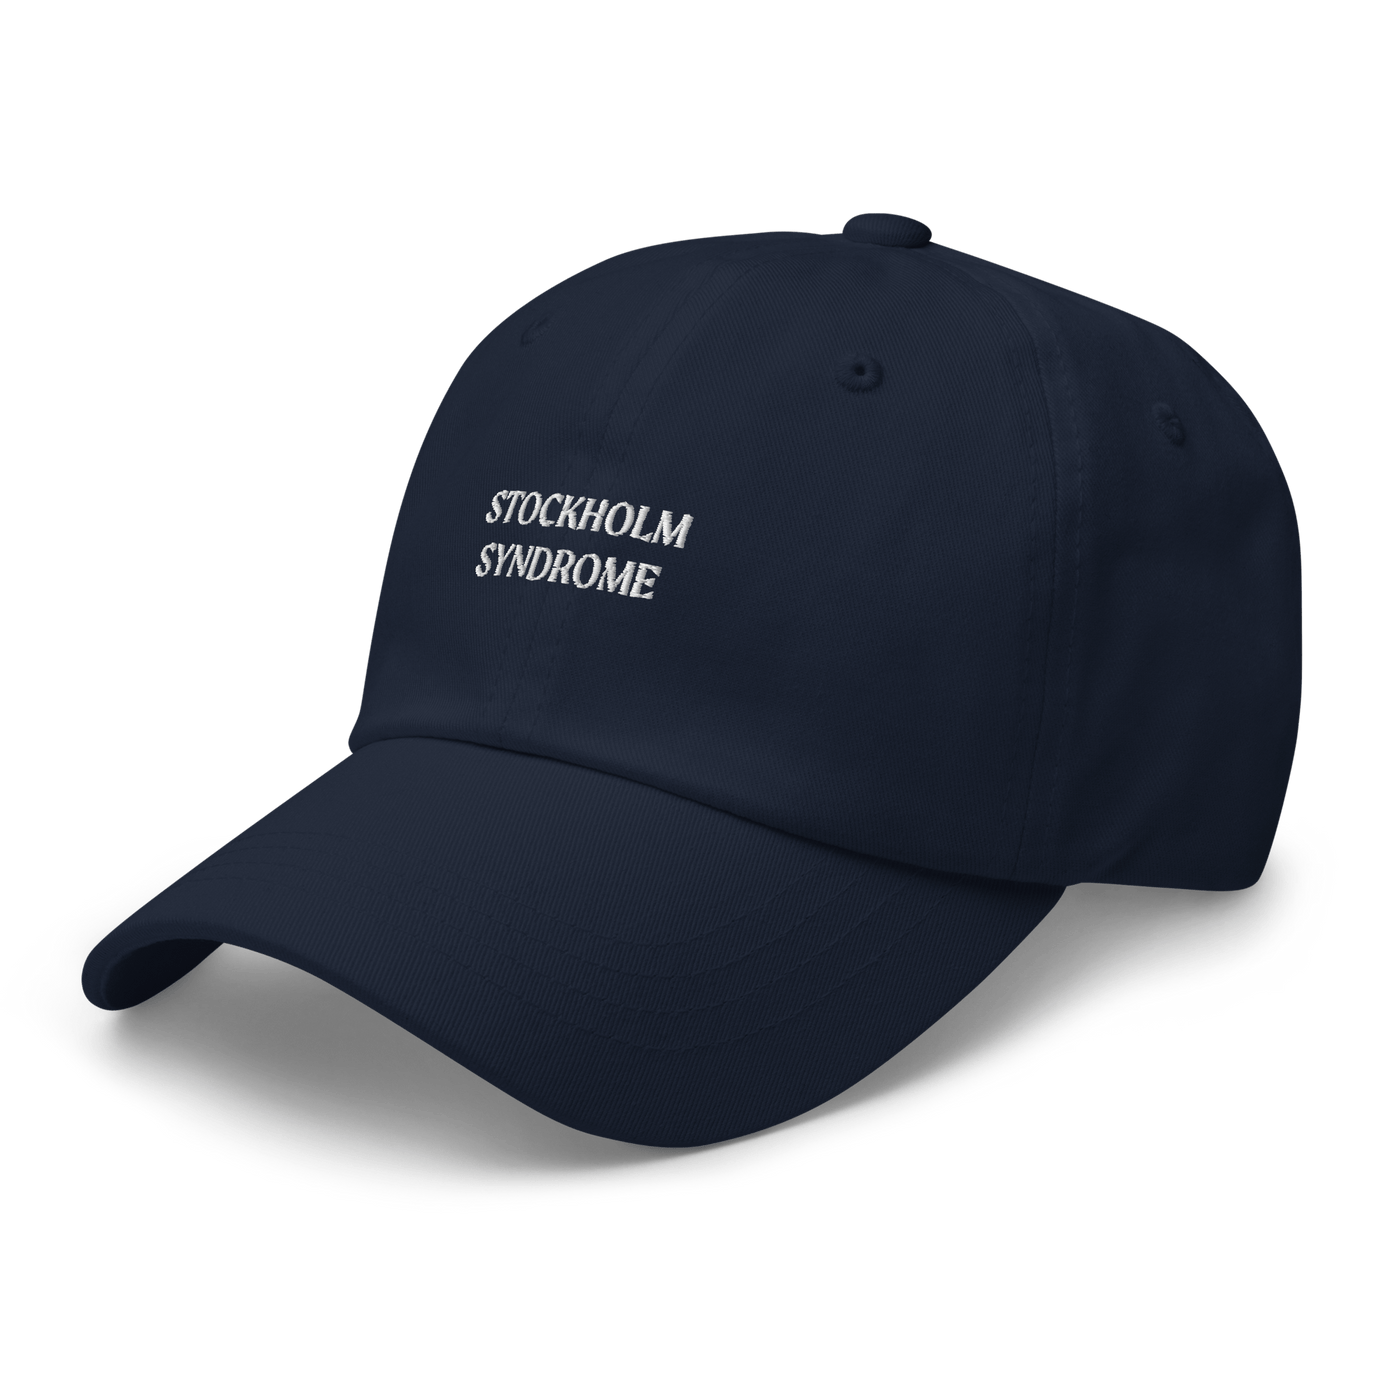 Stockholm Syndrome Dad hat - Navy - - Just Another Cap Store